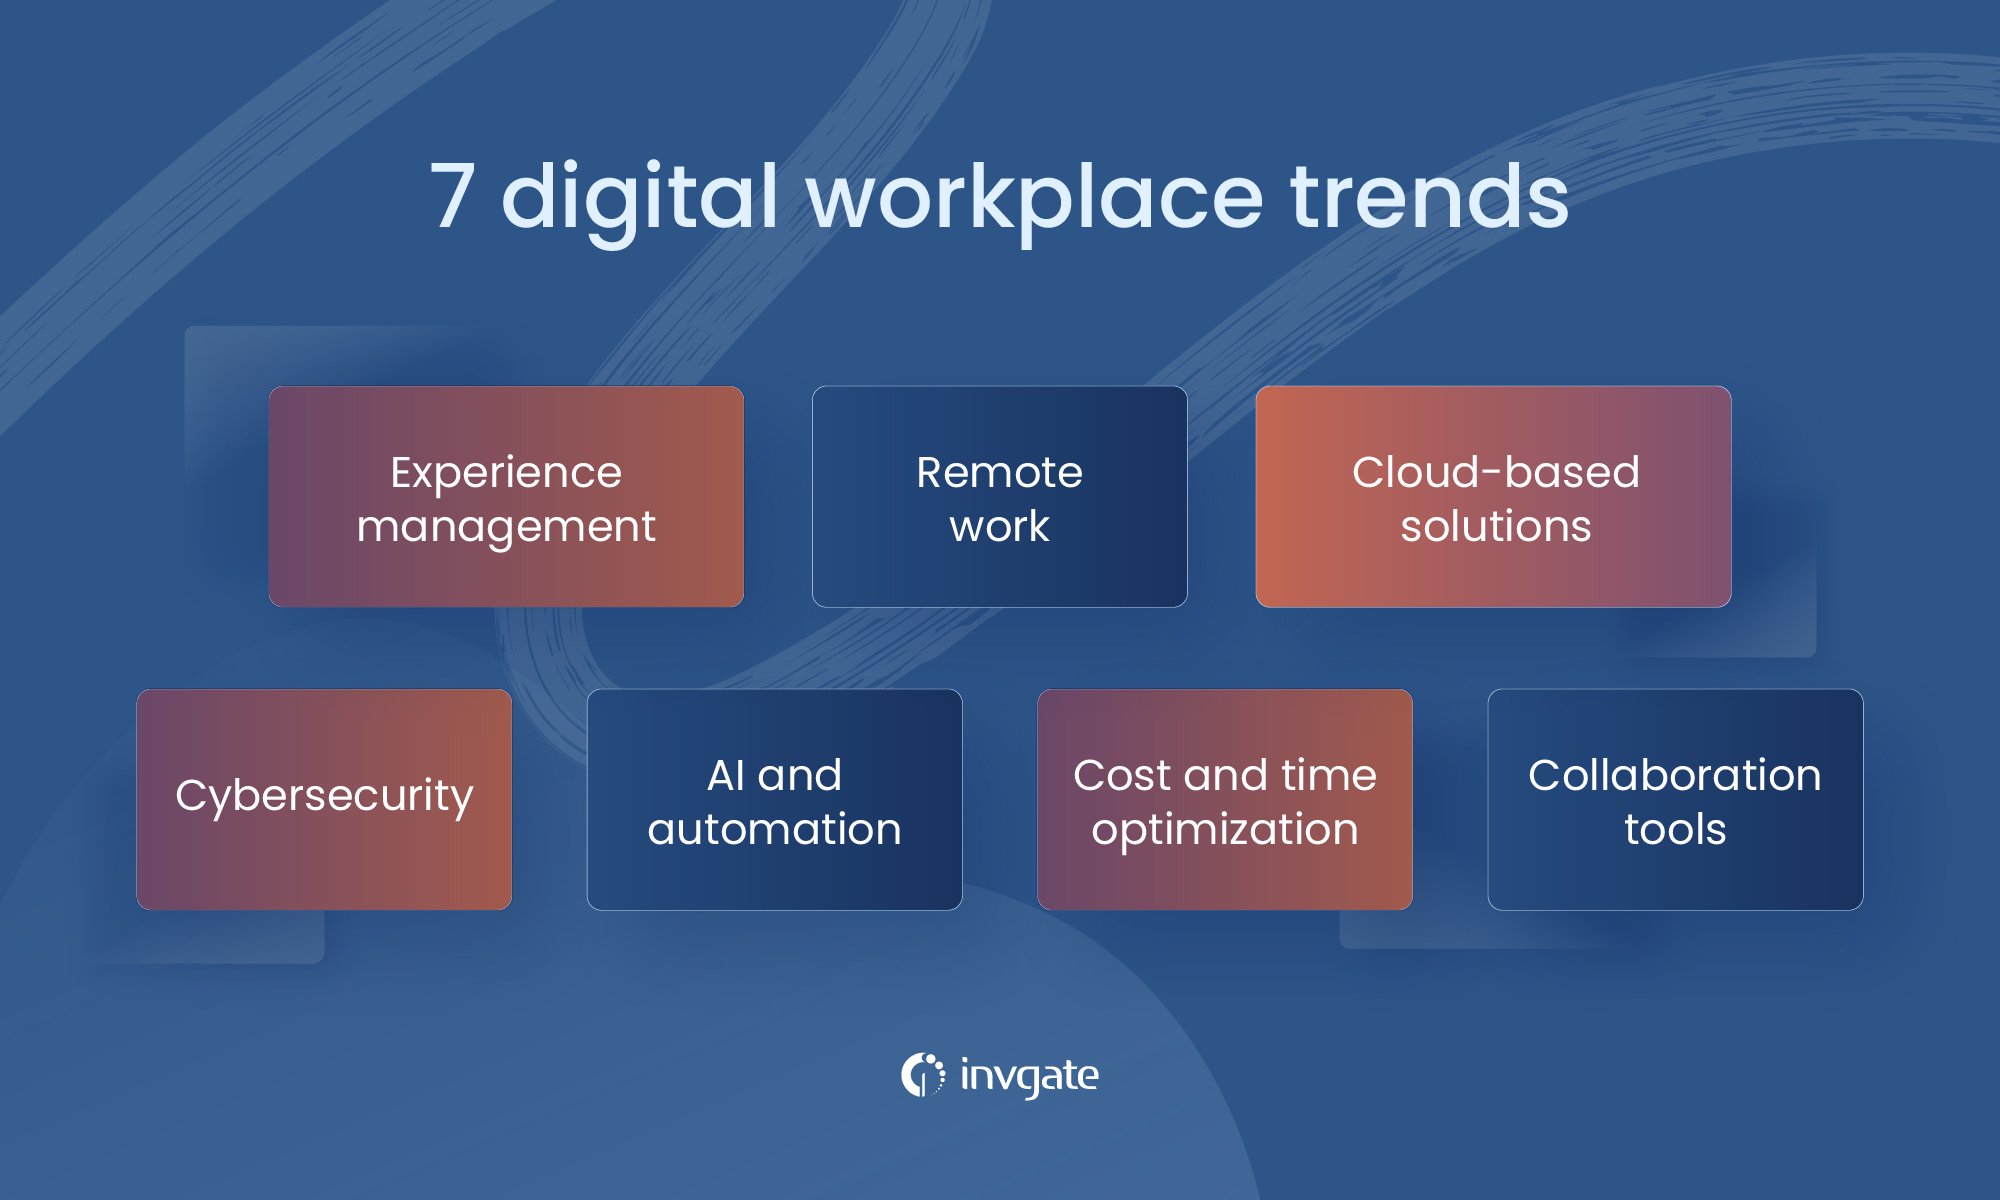 To preserve employee productivity and a healthy ROI in uncertain, rapidly changing times, your business must be attentive to the rise of digital workplace trends. This is our list of the 7 digital workplace trends you should be aware of.